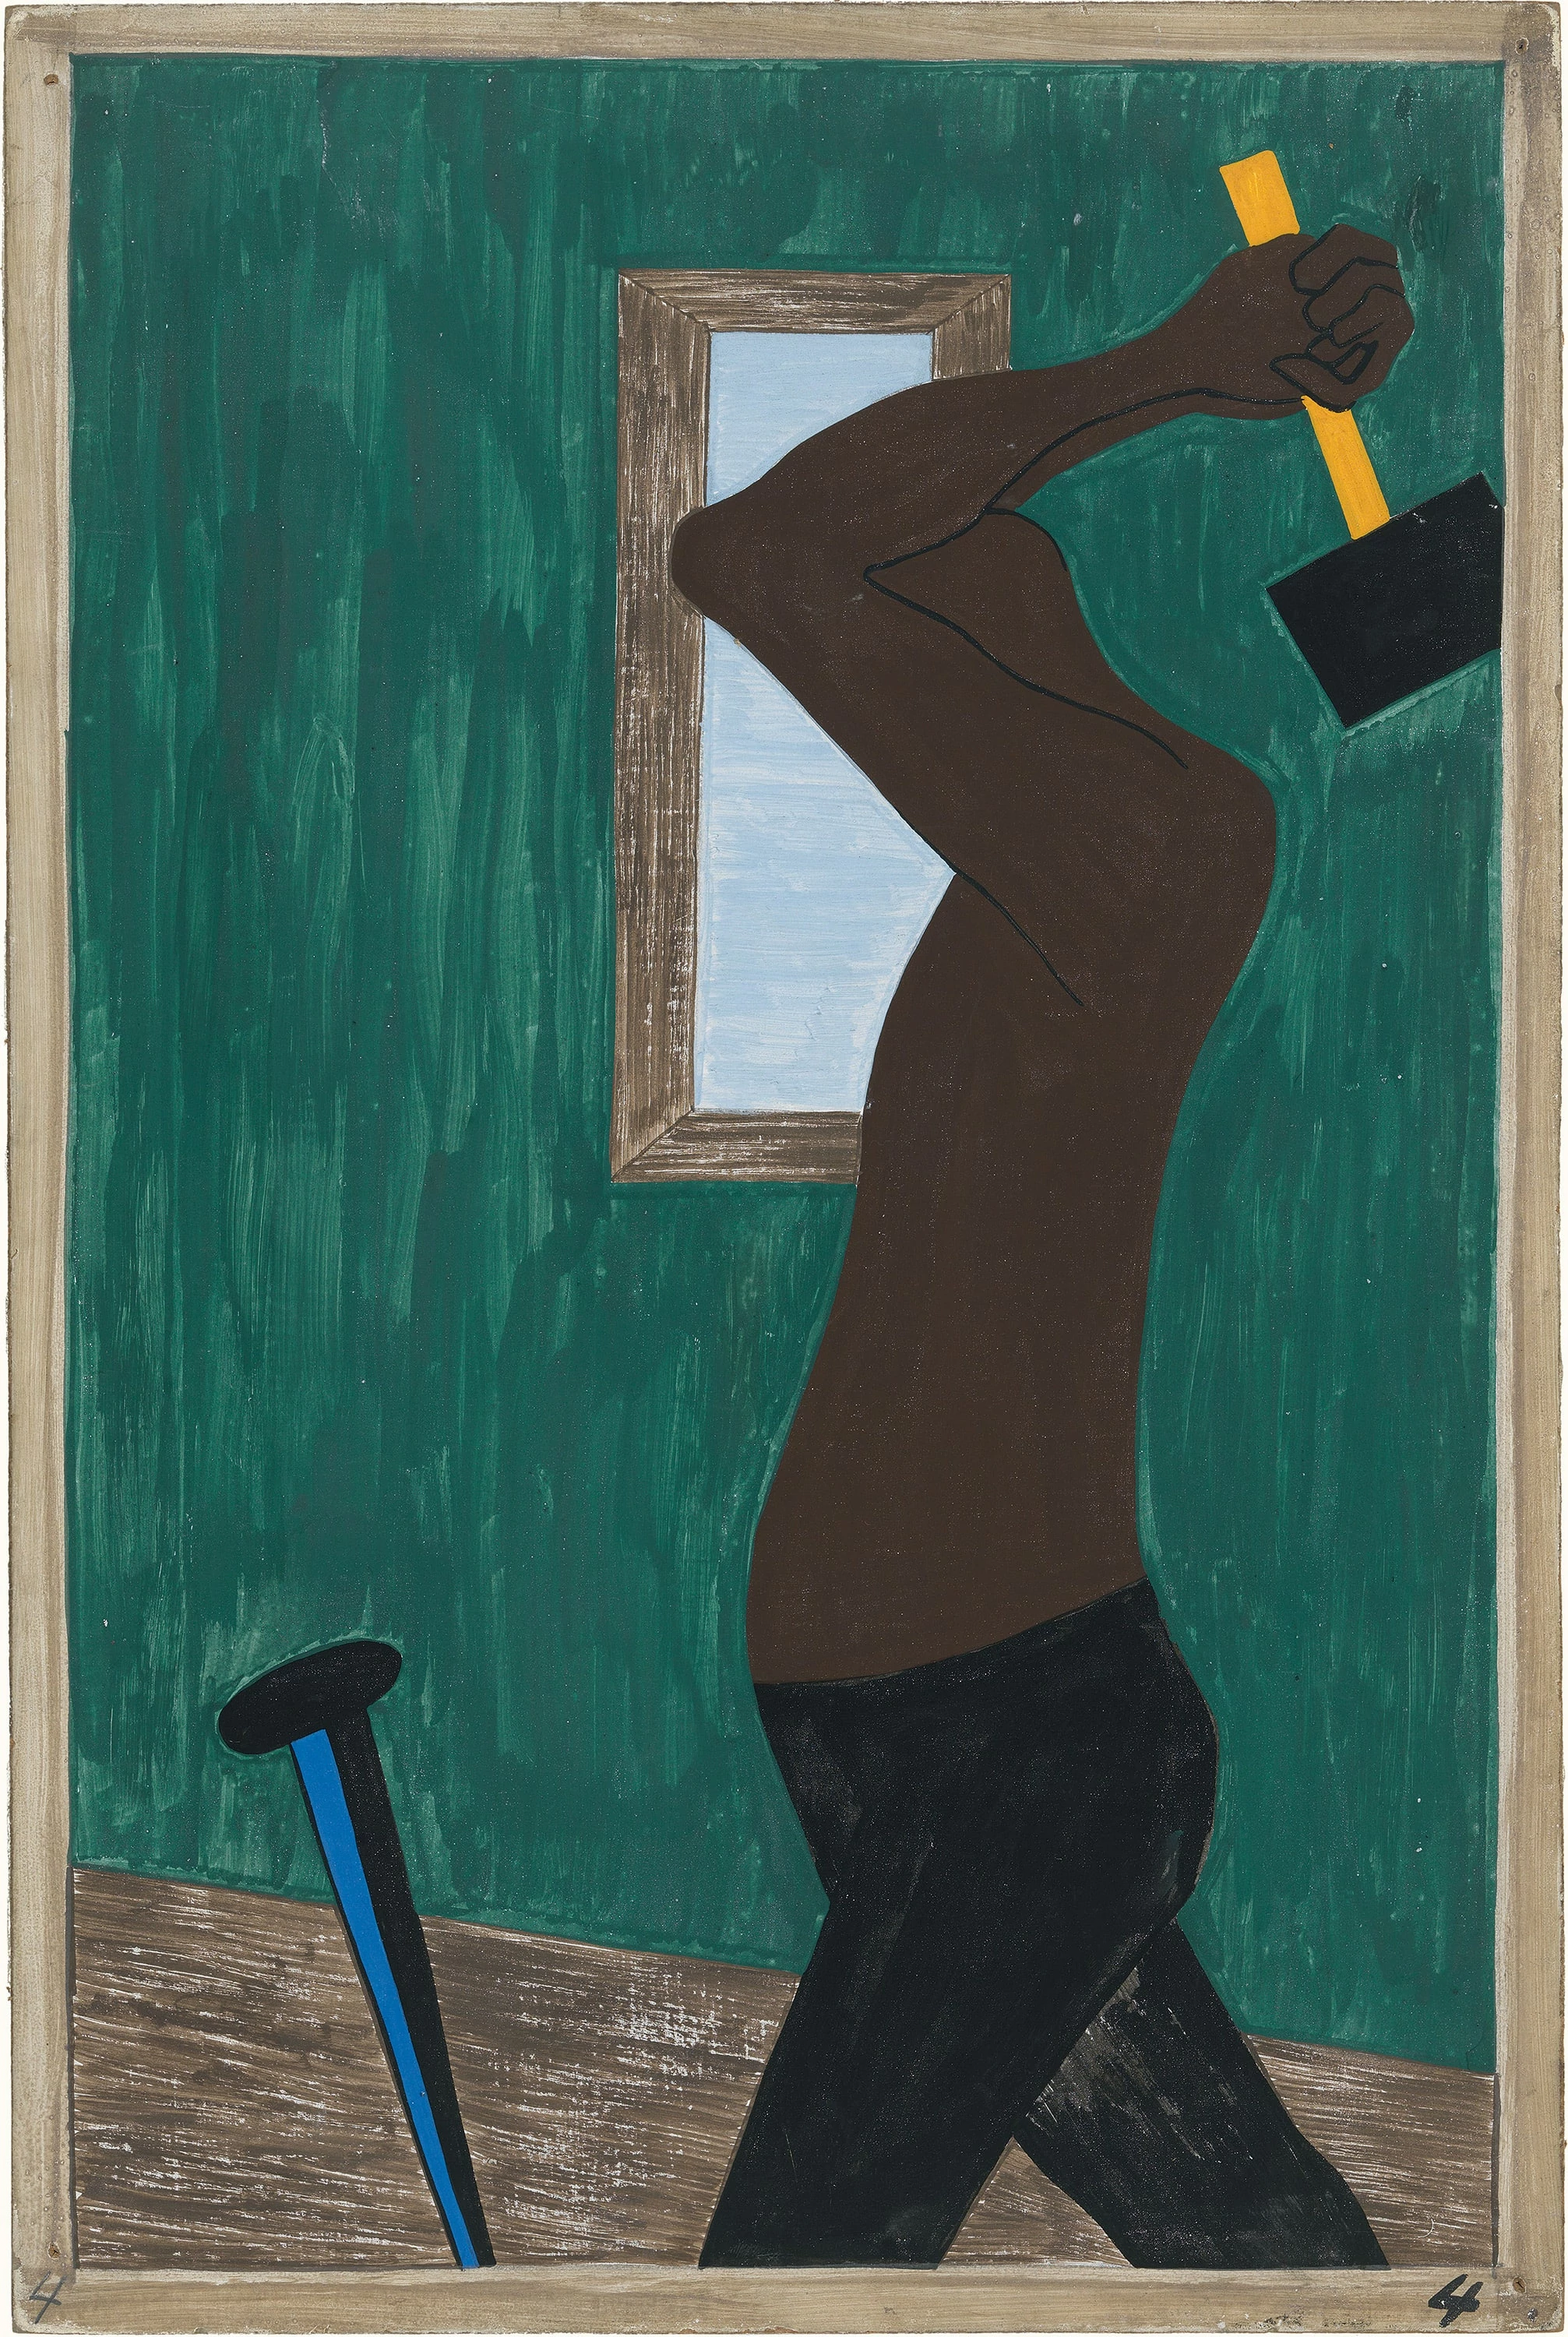 Migration Series No.4:  All other sources of labor having been exhausted, the migrants were the last resource, Jacob Lawrence